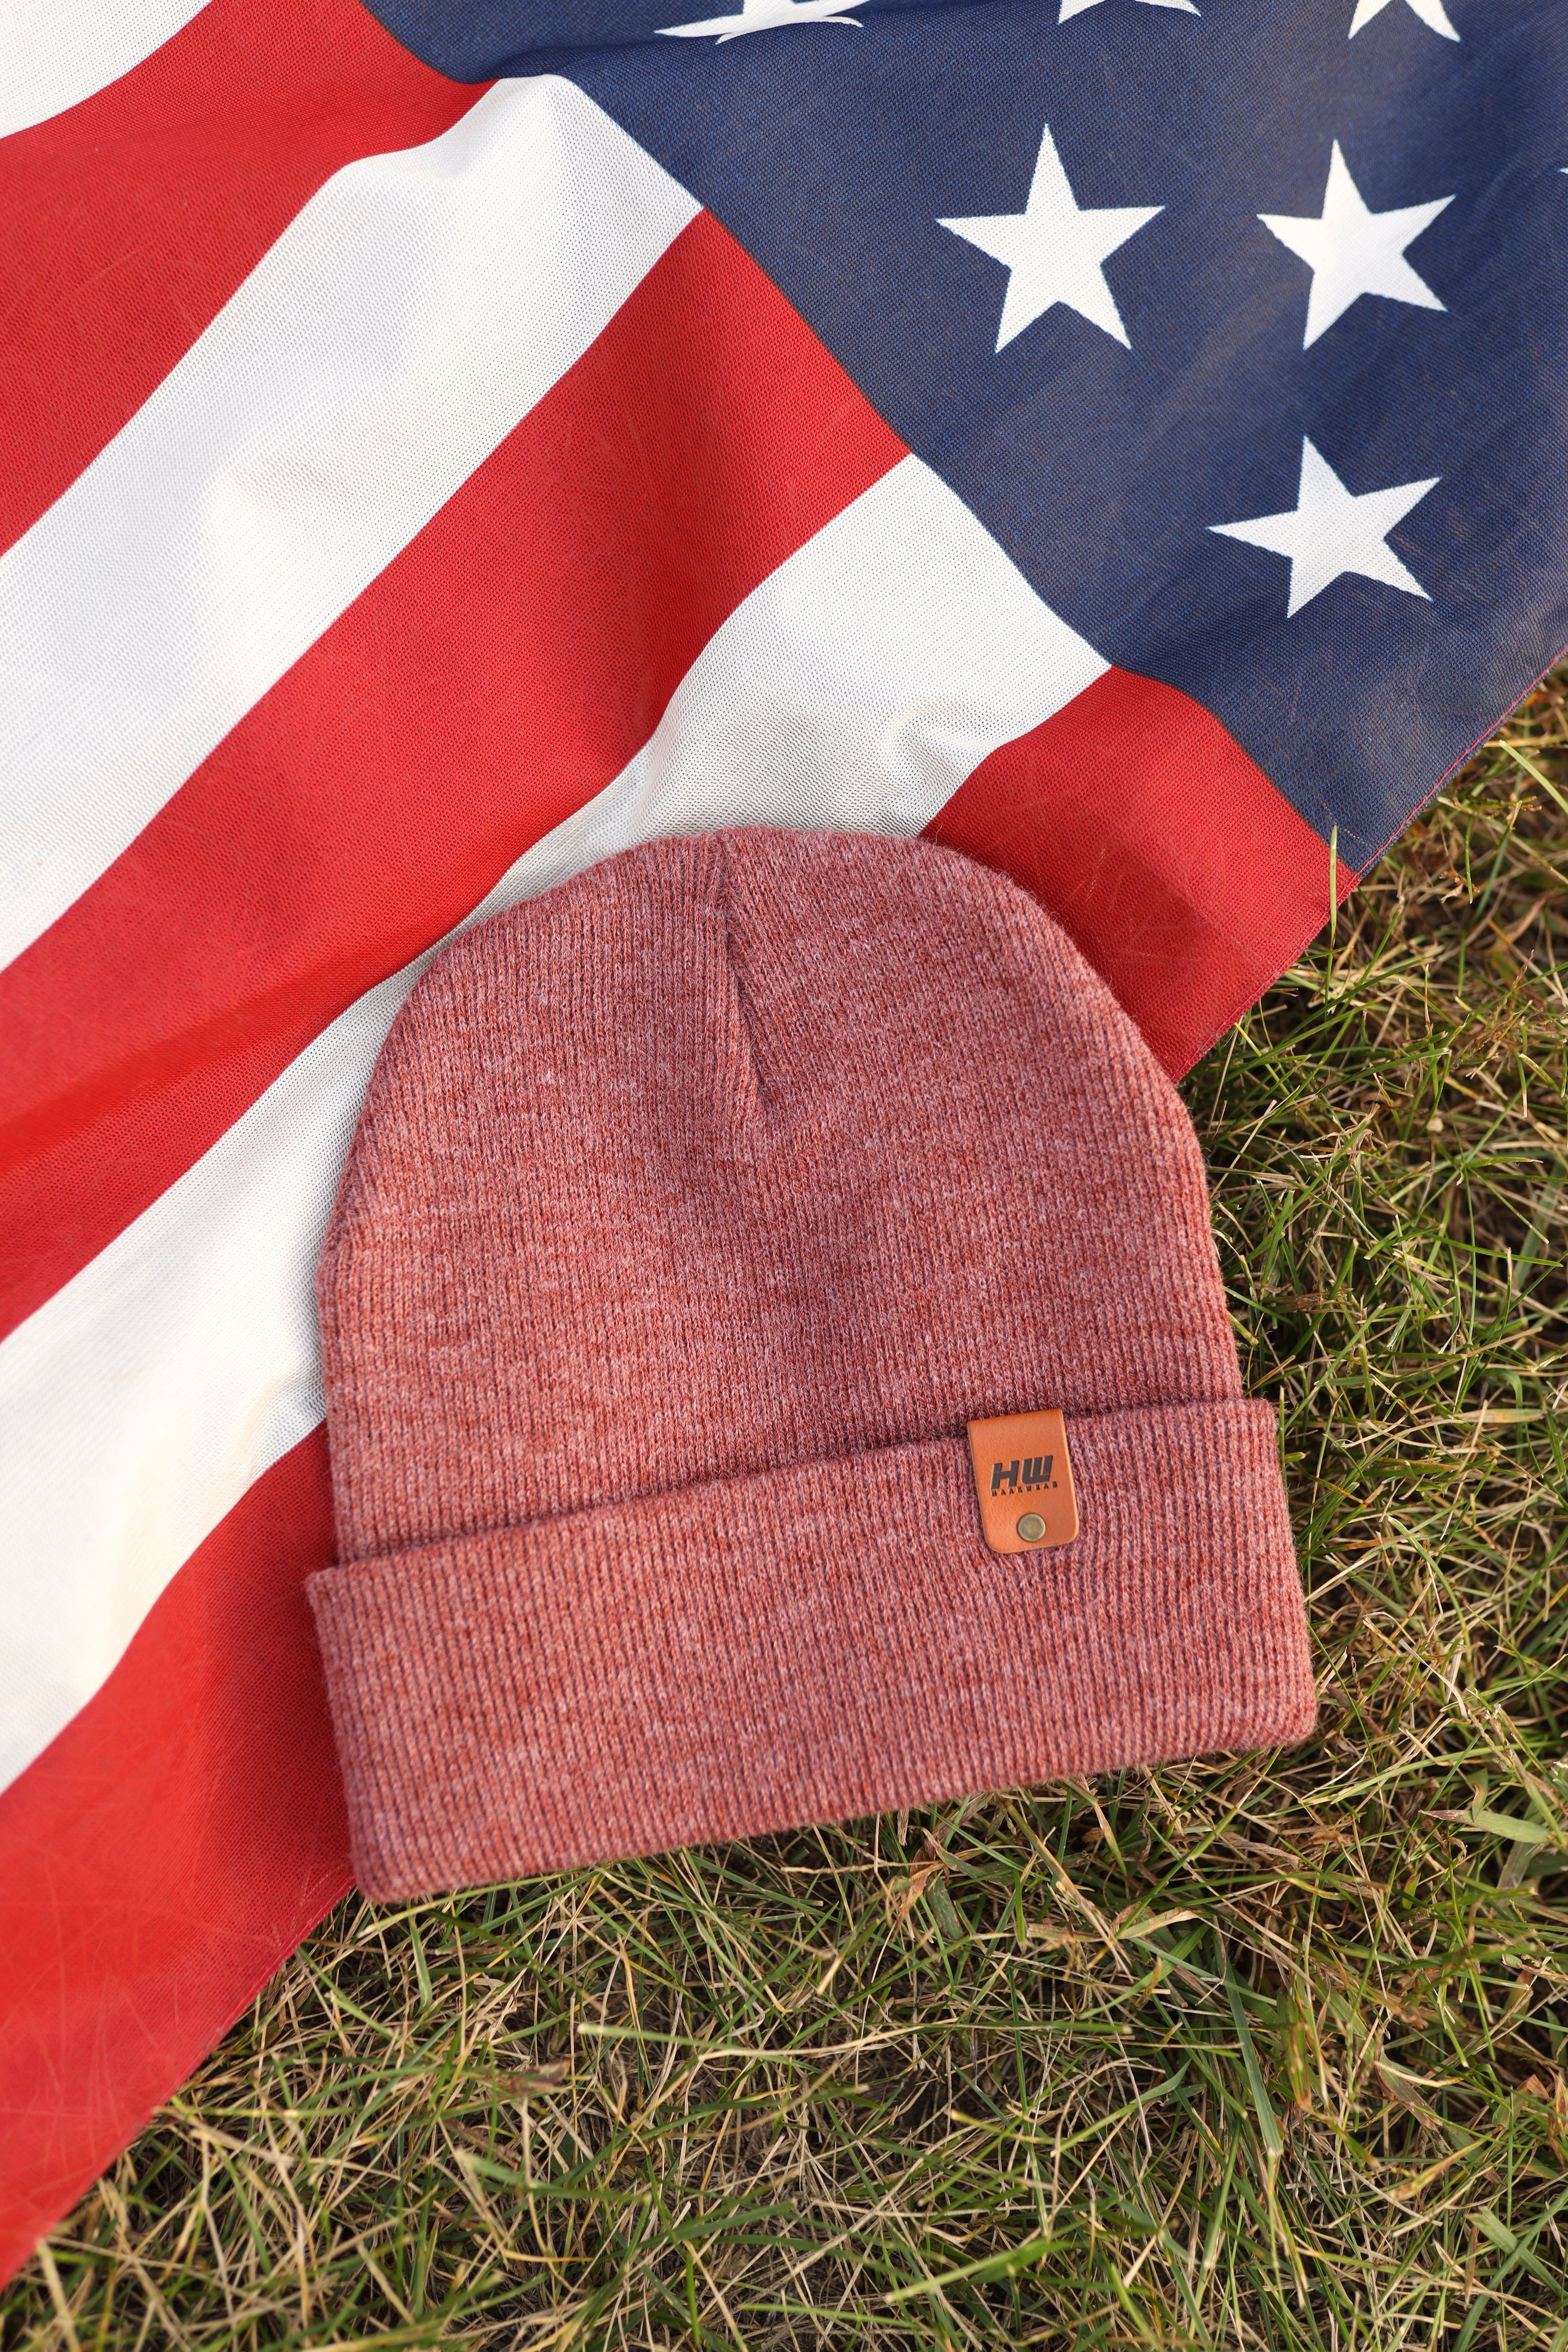 Made in USA Beanies